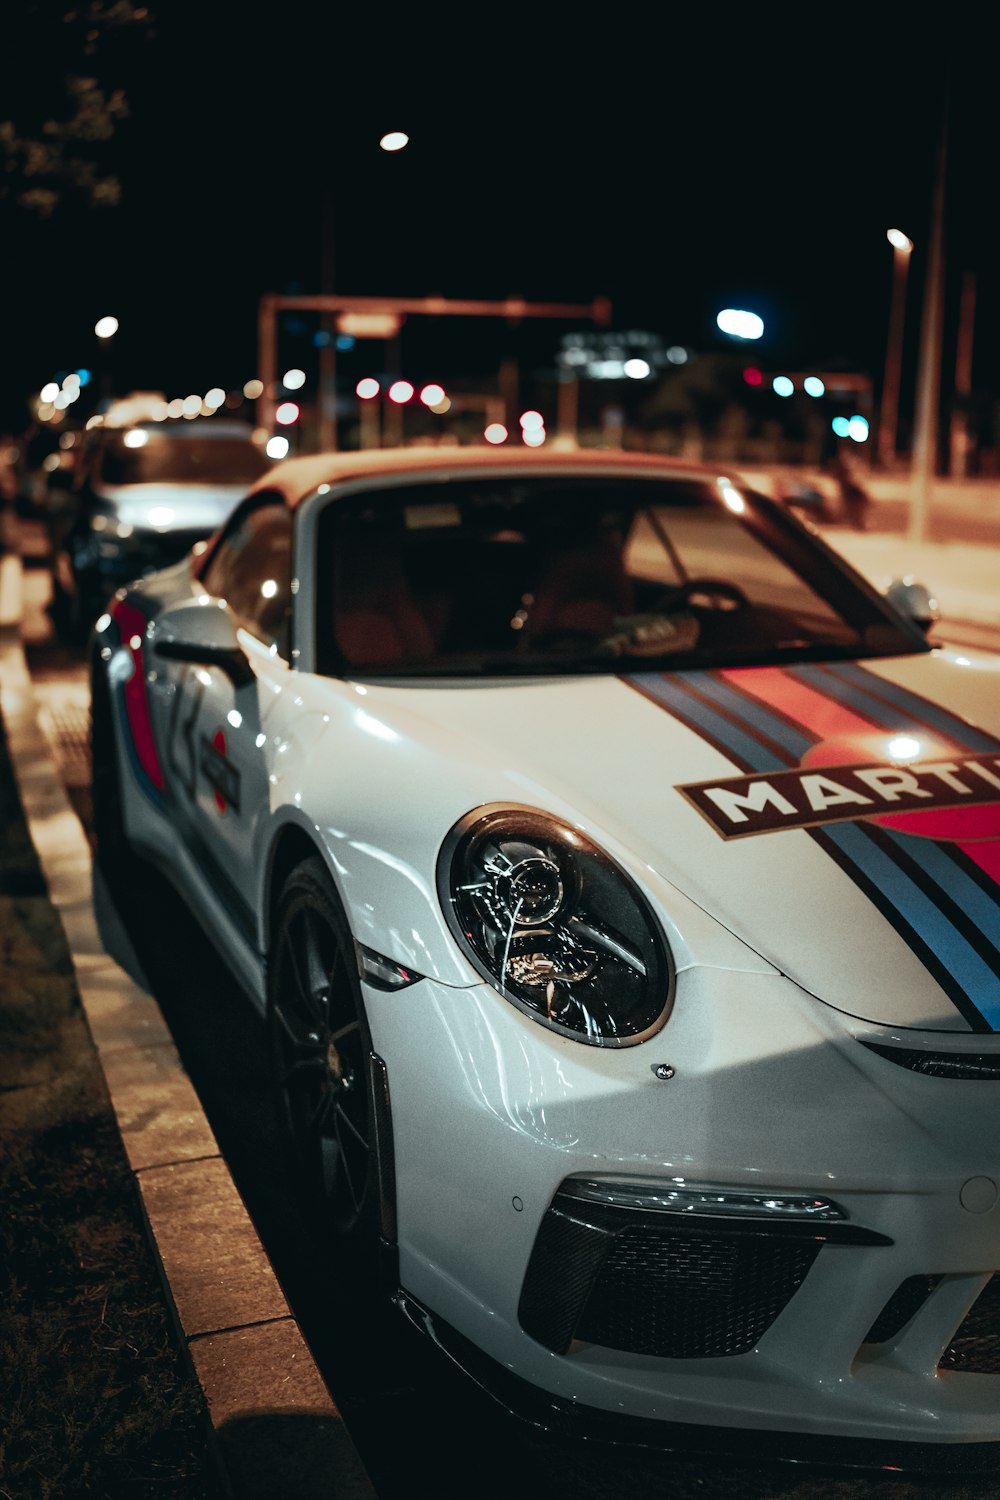 white porsche 911 parked on street during night time